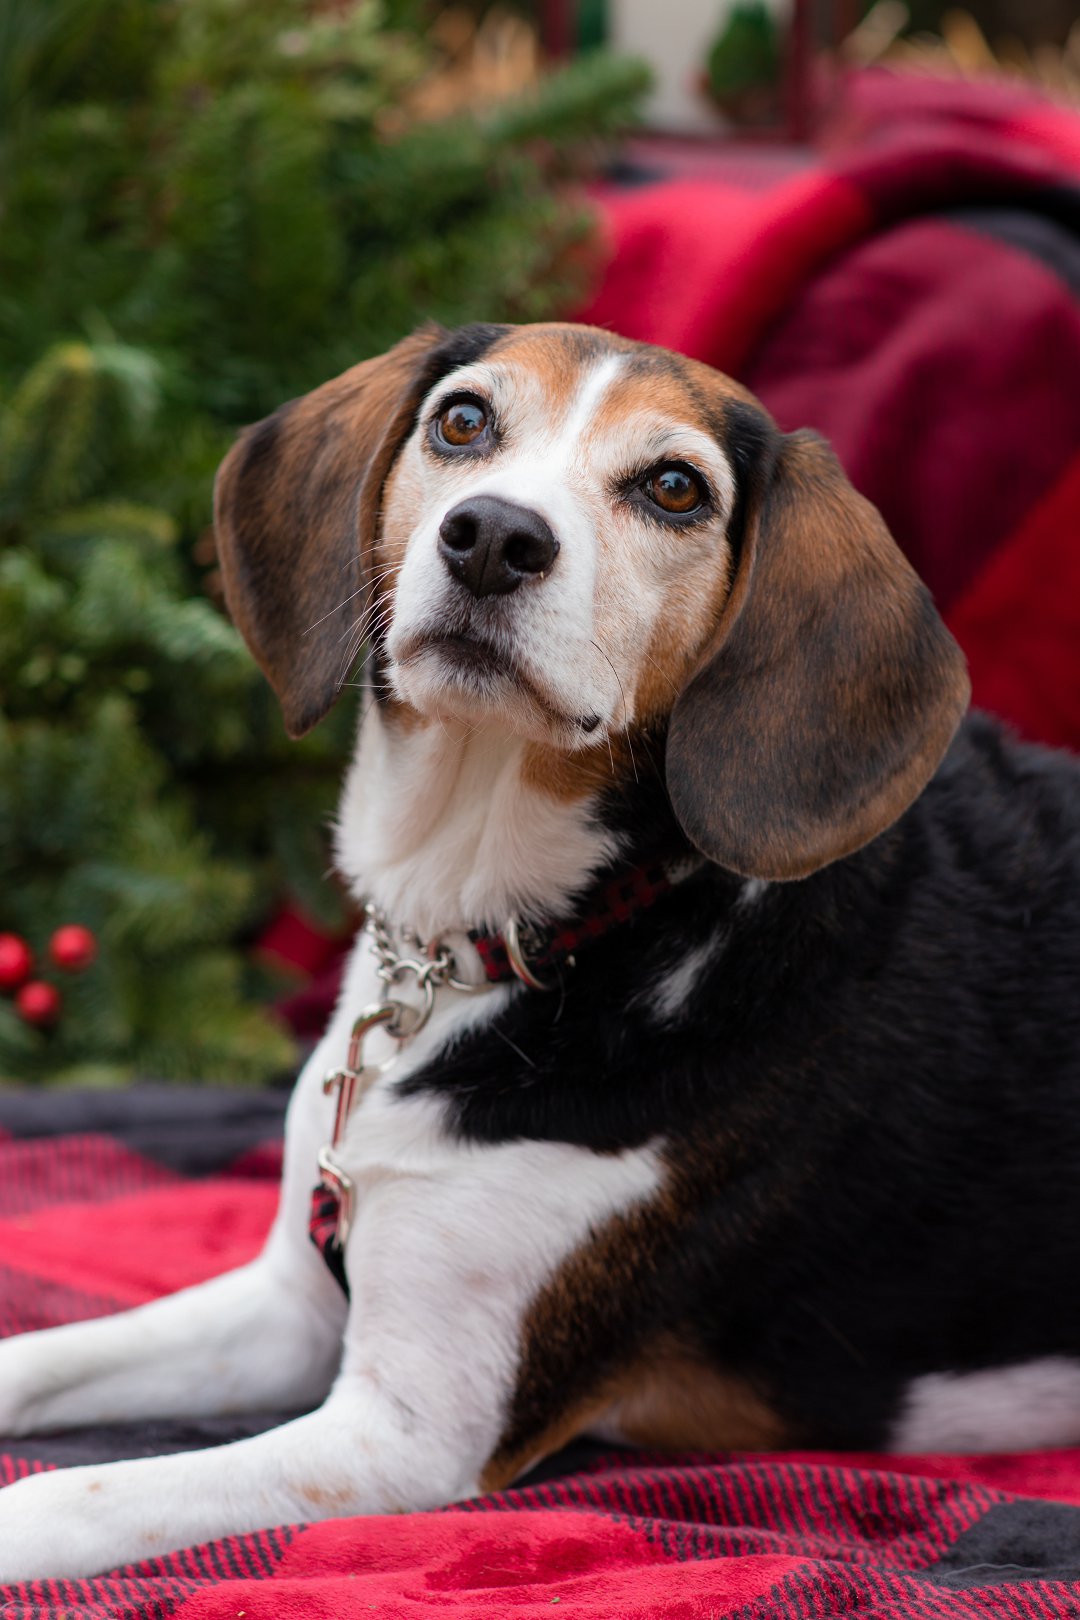 Why Does My Beagle Behave Like That? Unraveling the Quirks and Secrets Behind Your Canine Companion